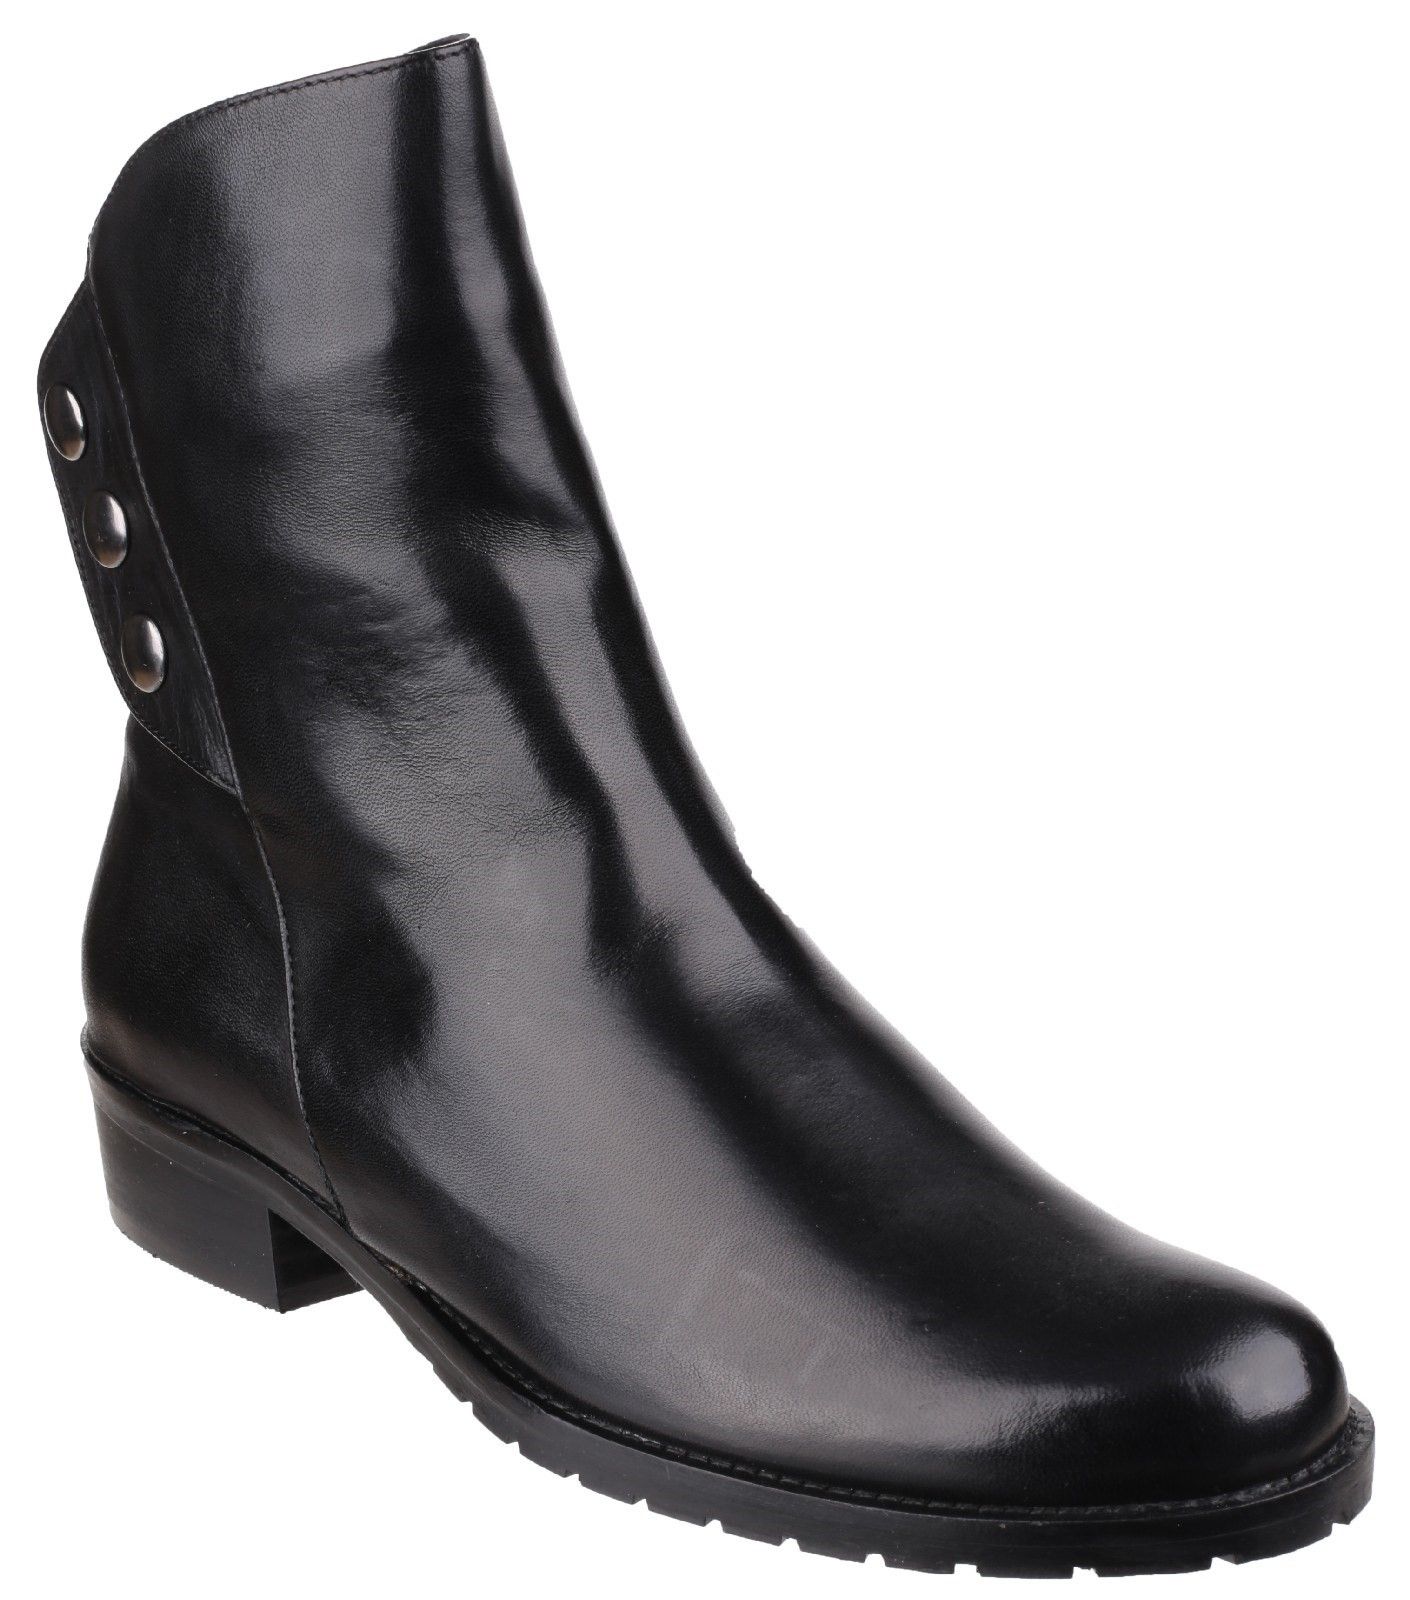 Riva brings classic Italian style with a twist with the Buttons leather dress boot. Crafted with asymmetric lines and stylish button detail. A mid-height block heel gives timeless elegance.Buttons is a stylish ankle boot from 'Riva'. 
Featuring a flap over cuff at the front of the ankle. 
popper buttons design on outer. 
Zip fastening for a easy fit. 
Full leather outer.